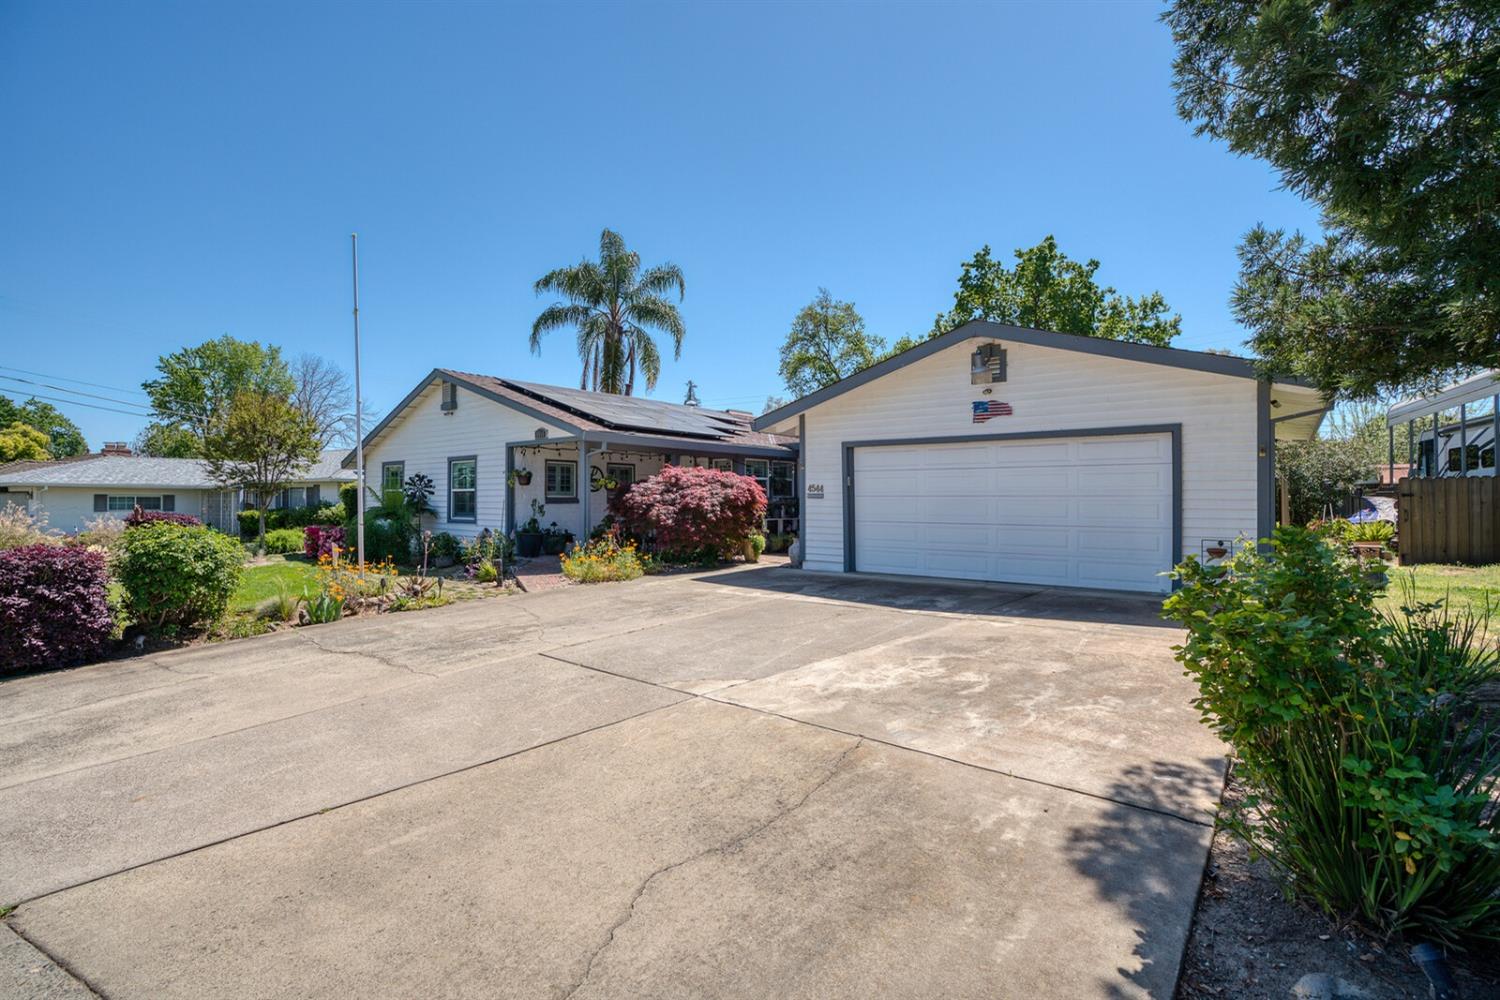 Photo of 4544 Belcrest Wy in Sacramento, CA